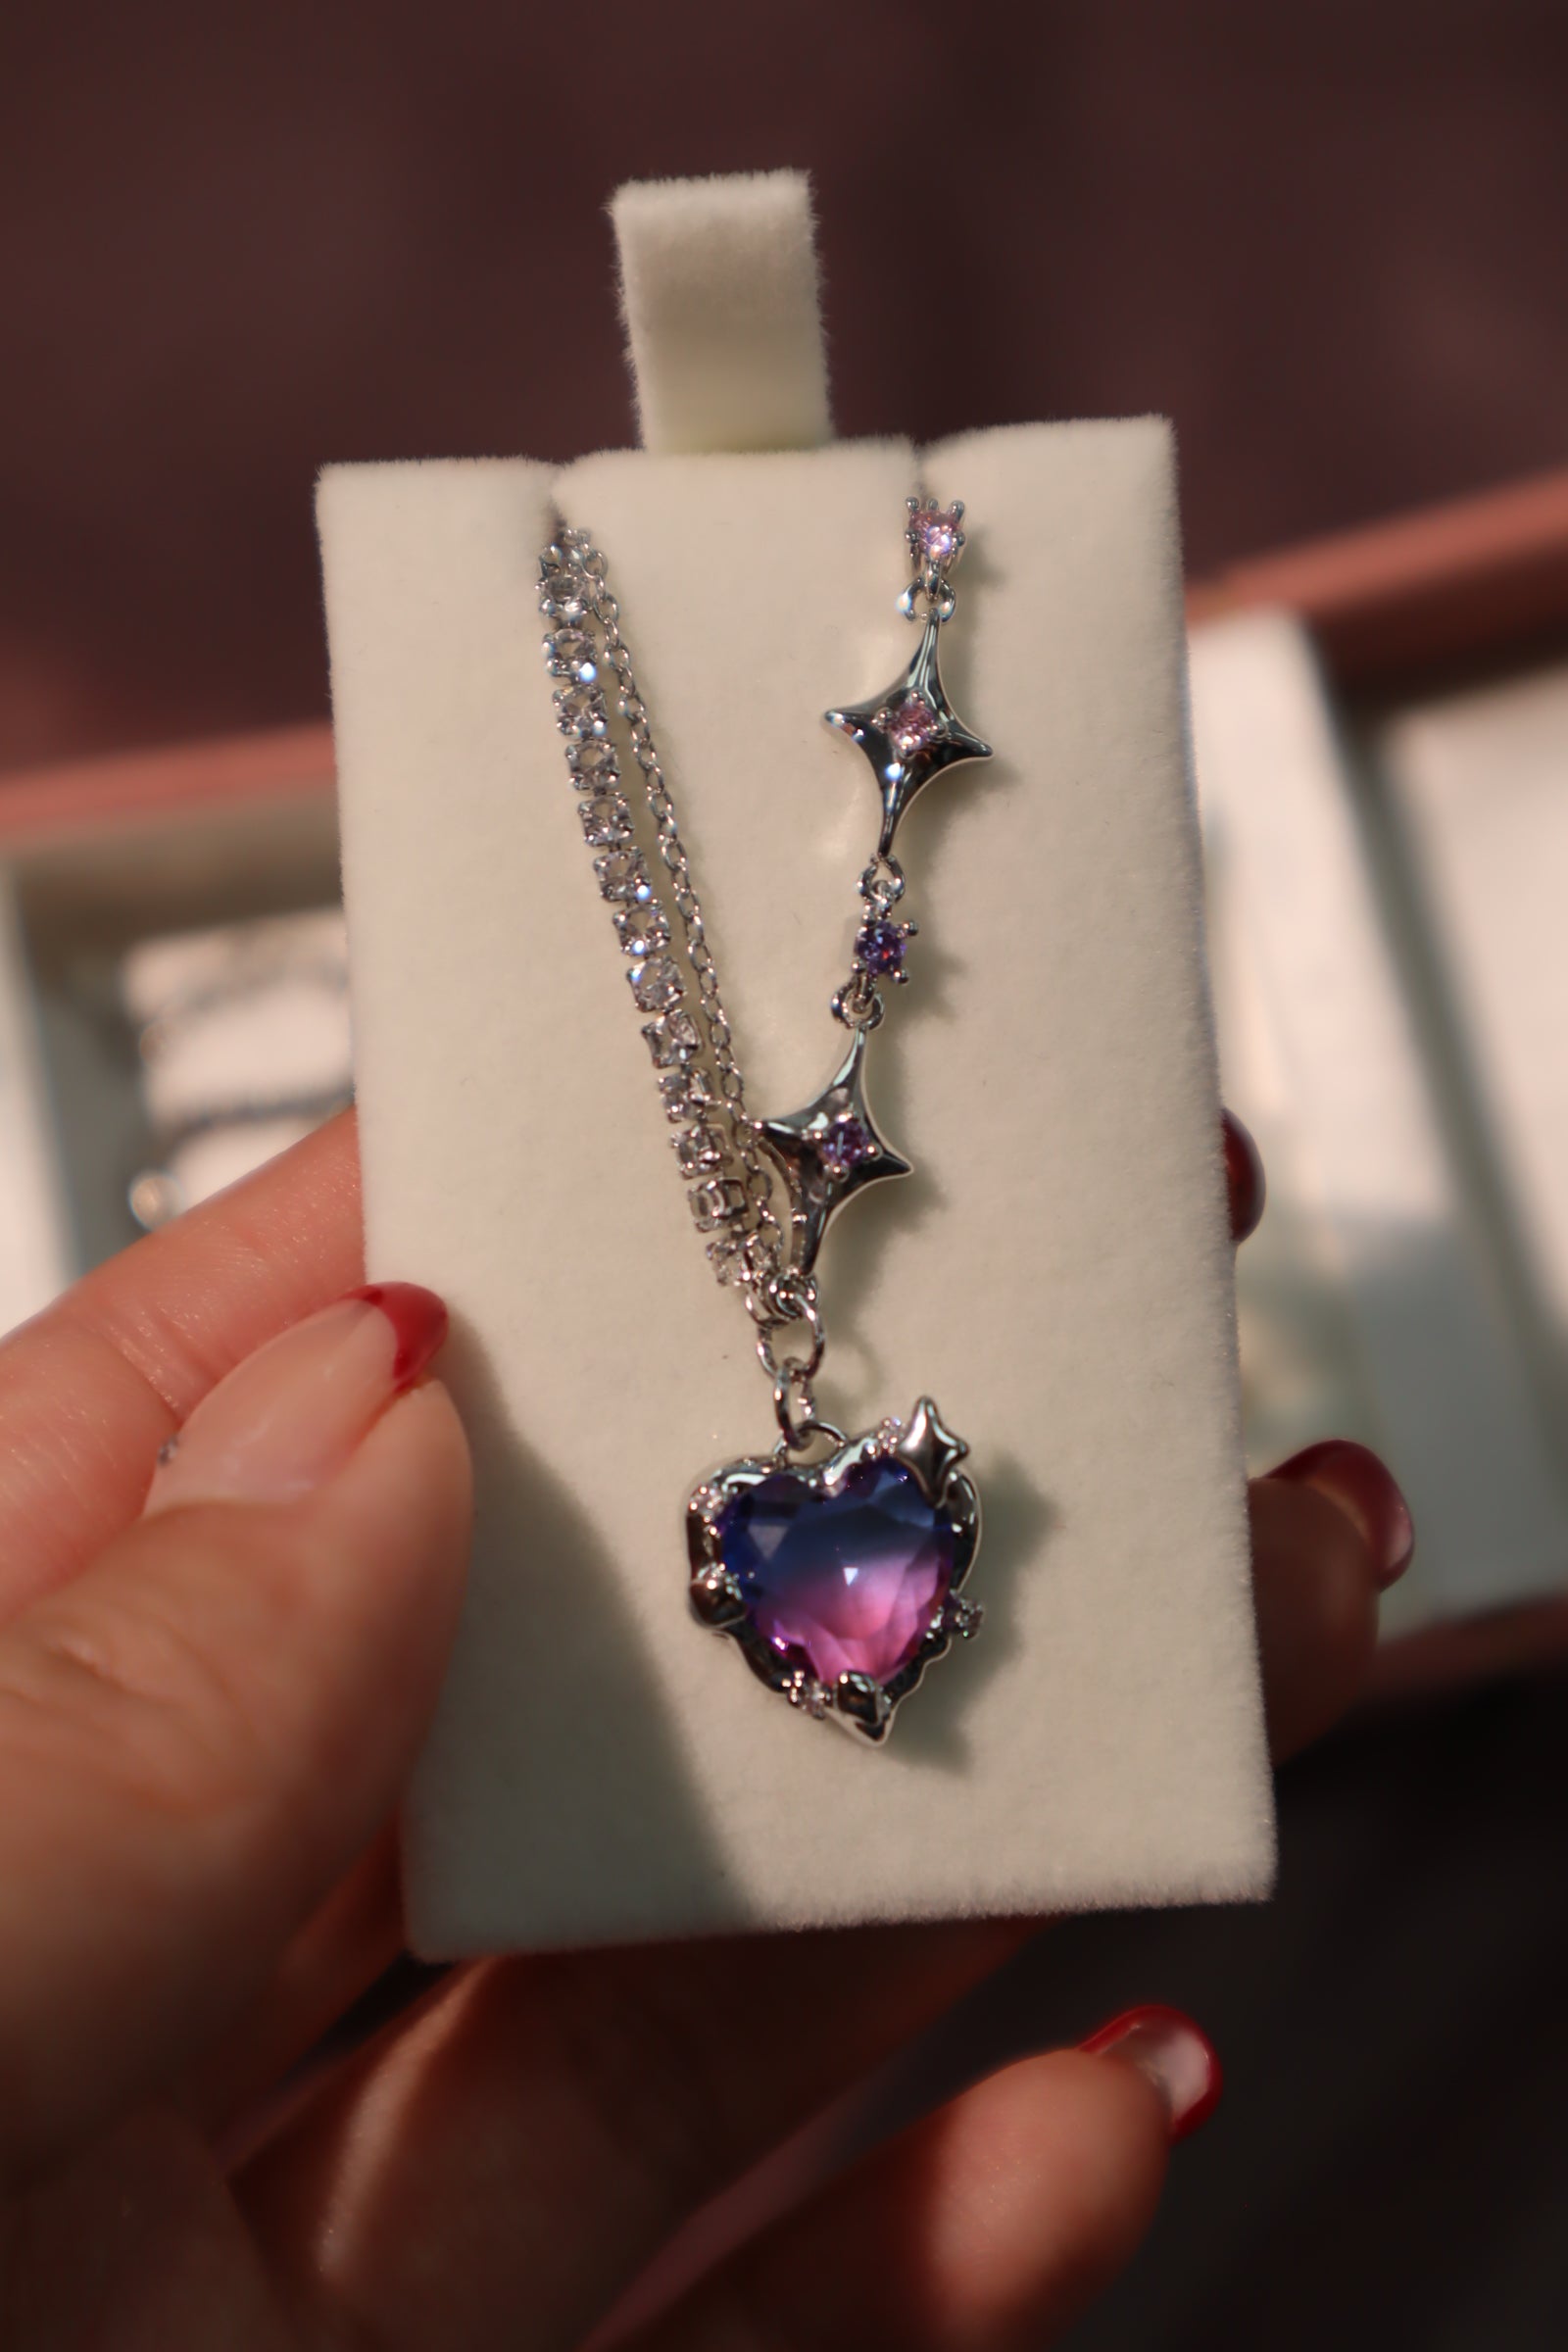 Gradient Heart Gift Set: Necklace+ Earrings+ Ring + Jewelry Case